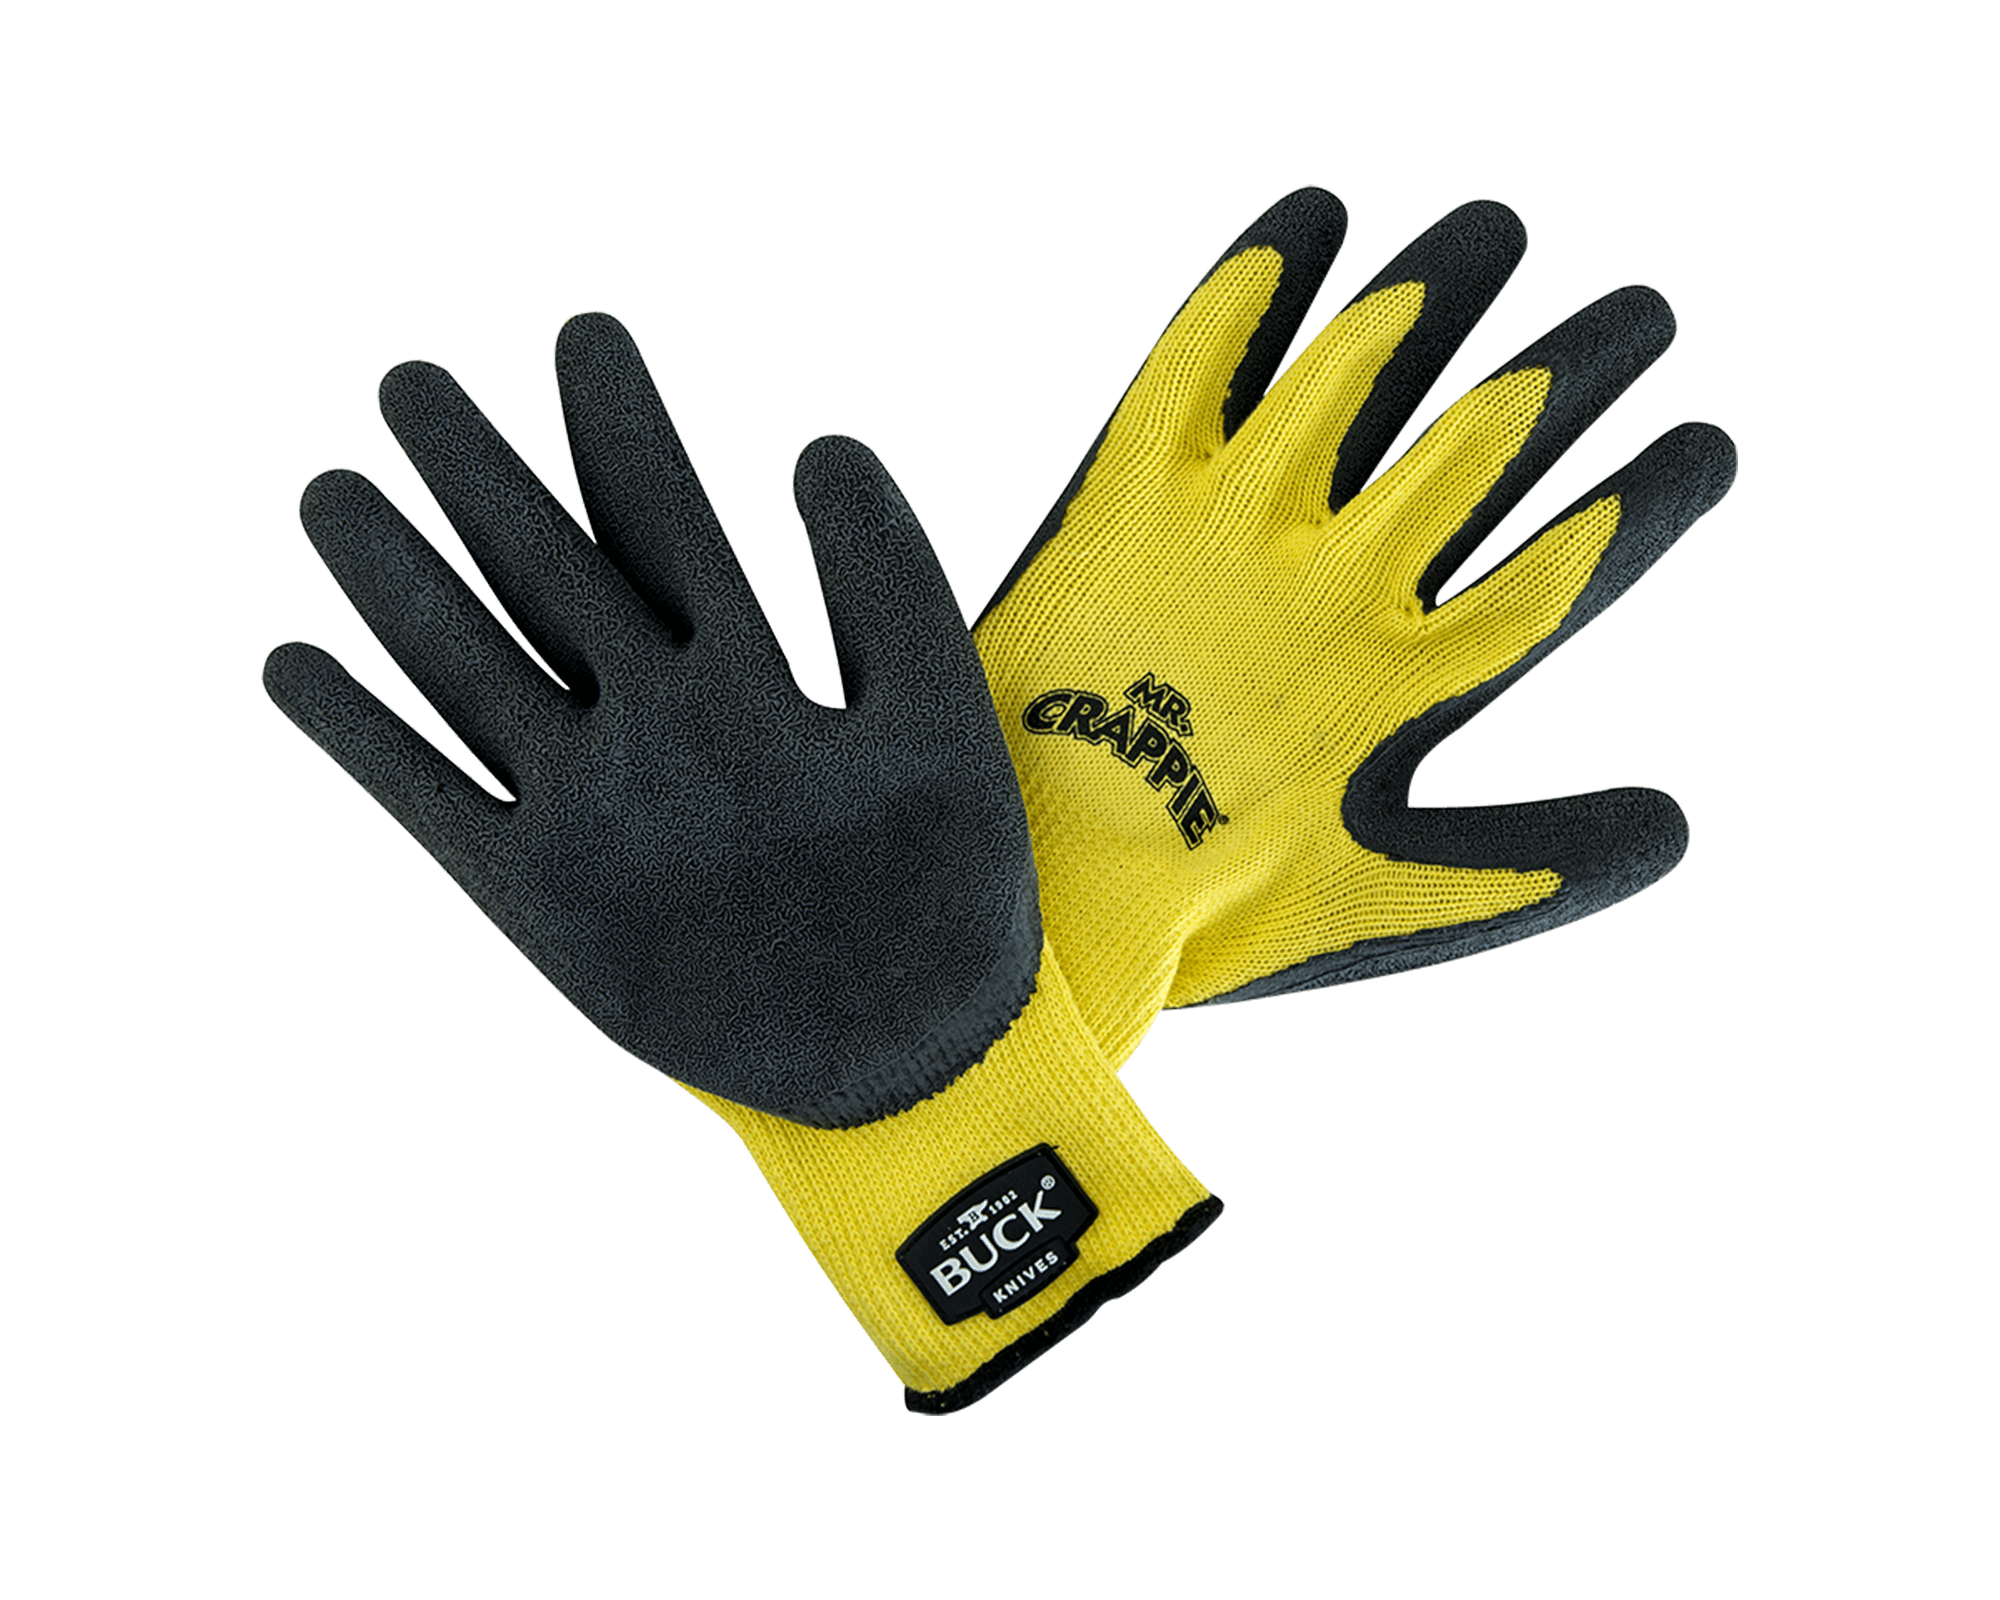 Mr. Crappie Fishing Gloves